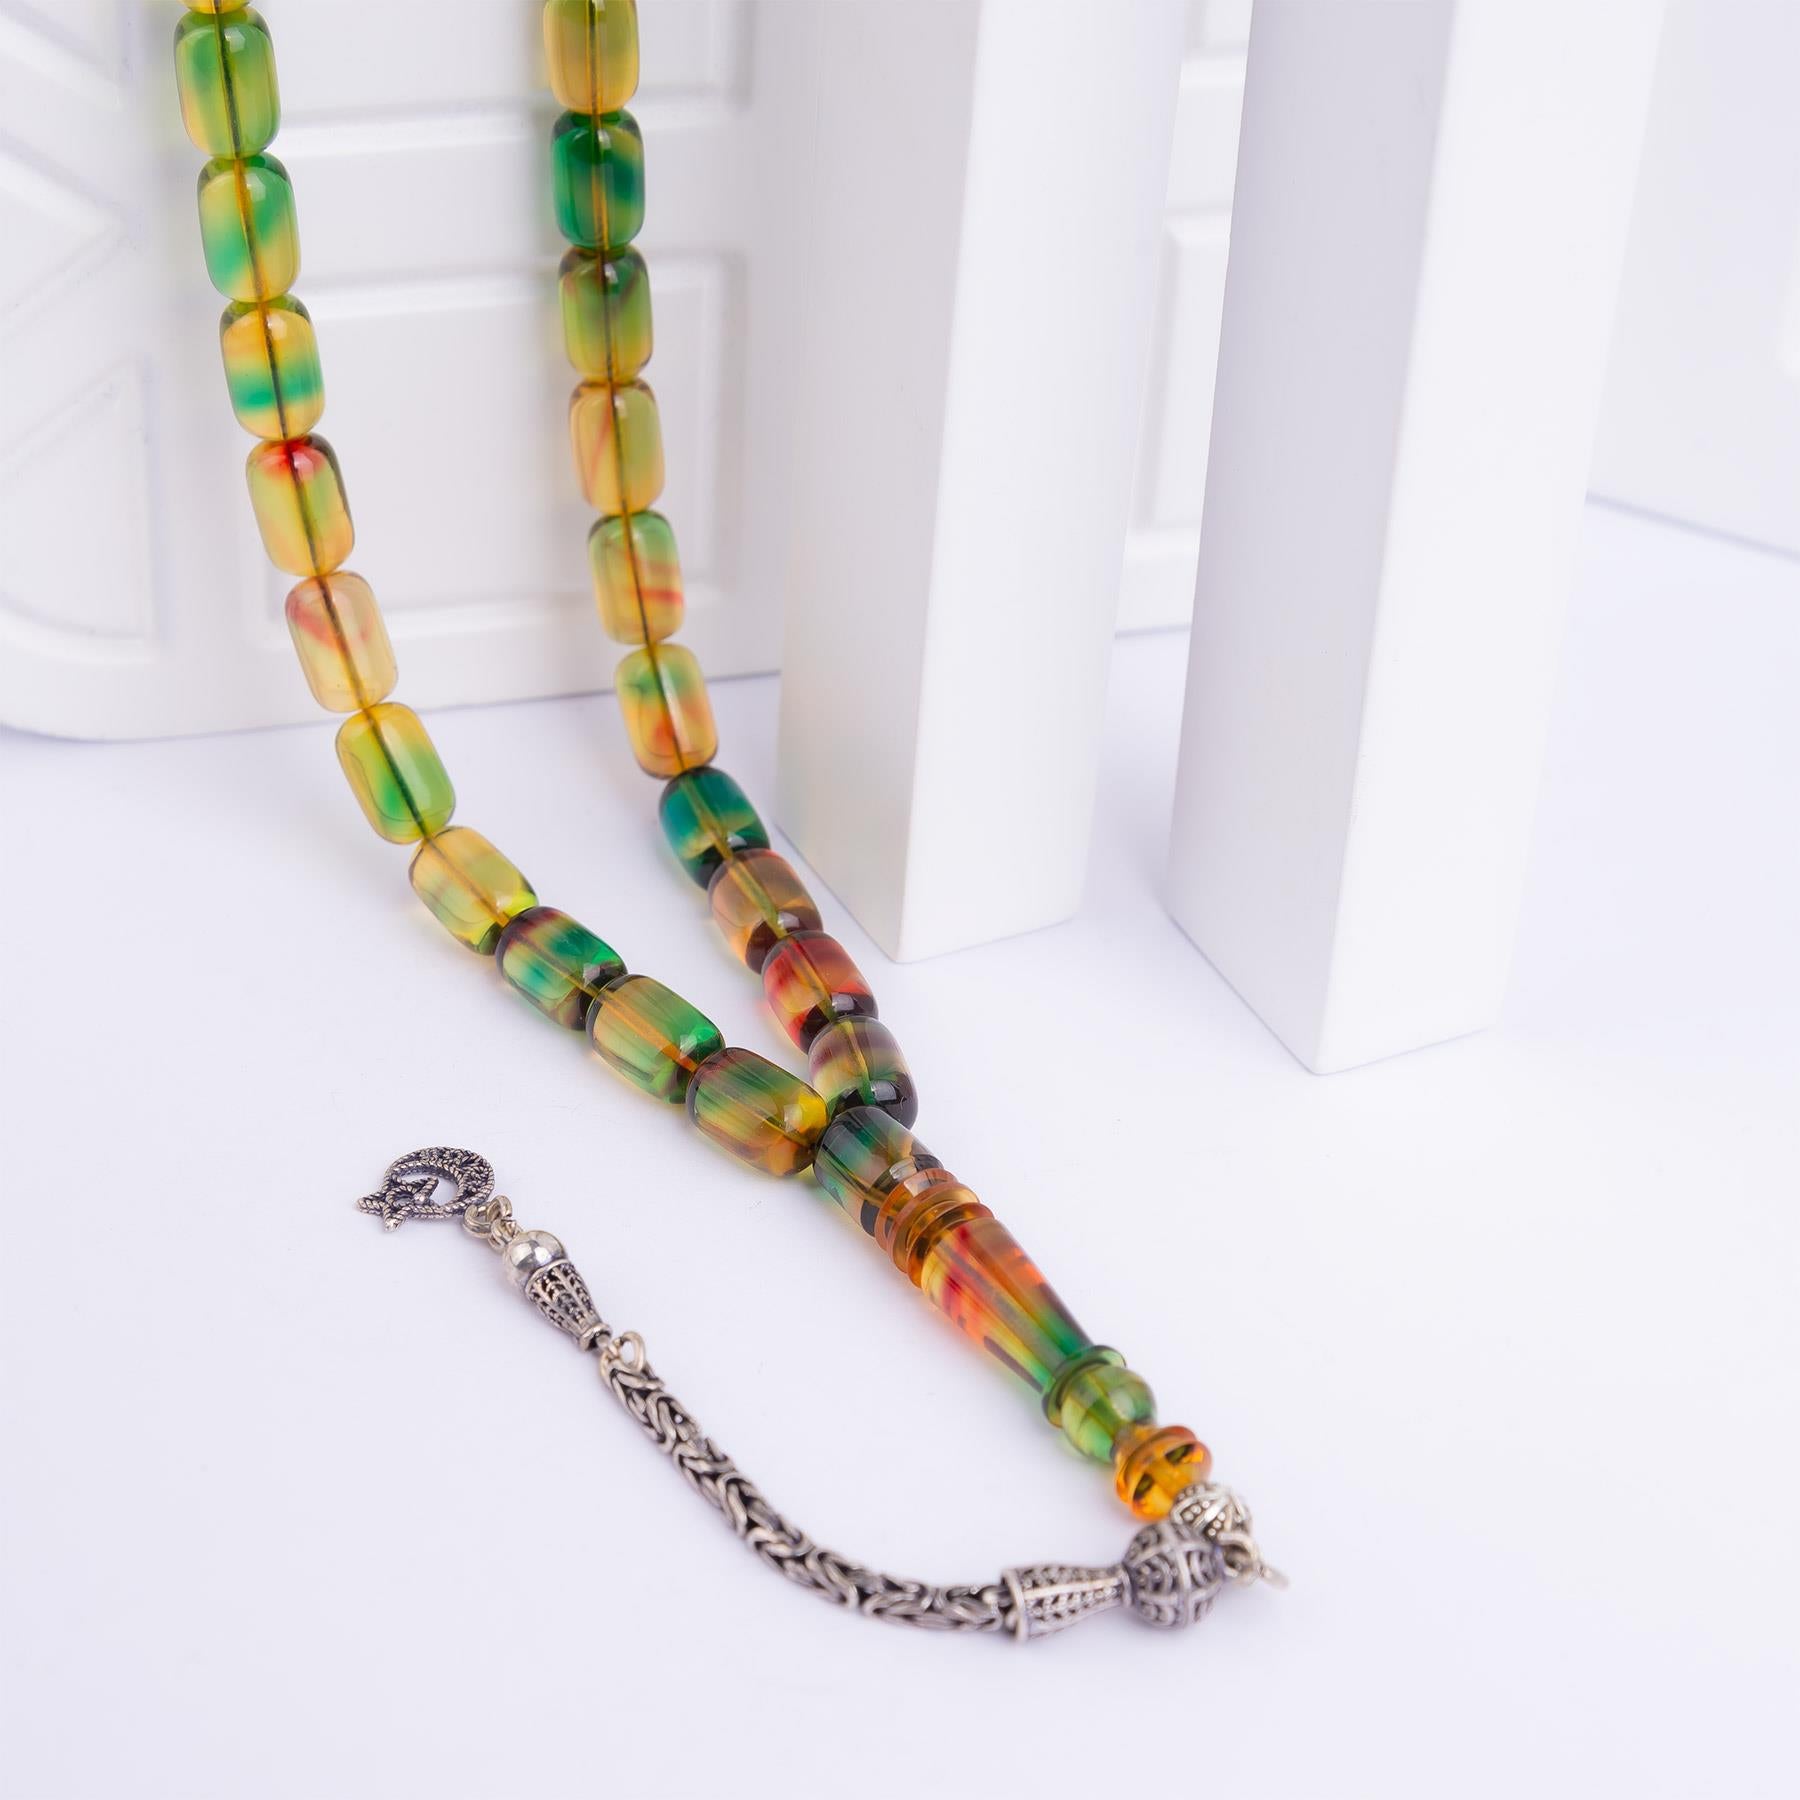 Capsule Cut Fire Amber Rosary with Silver Tassels 3Ve Tesbih Capsule Cut Colorful Fire Amber Rosary with Silver Tassels